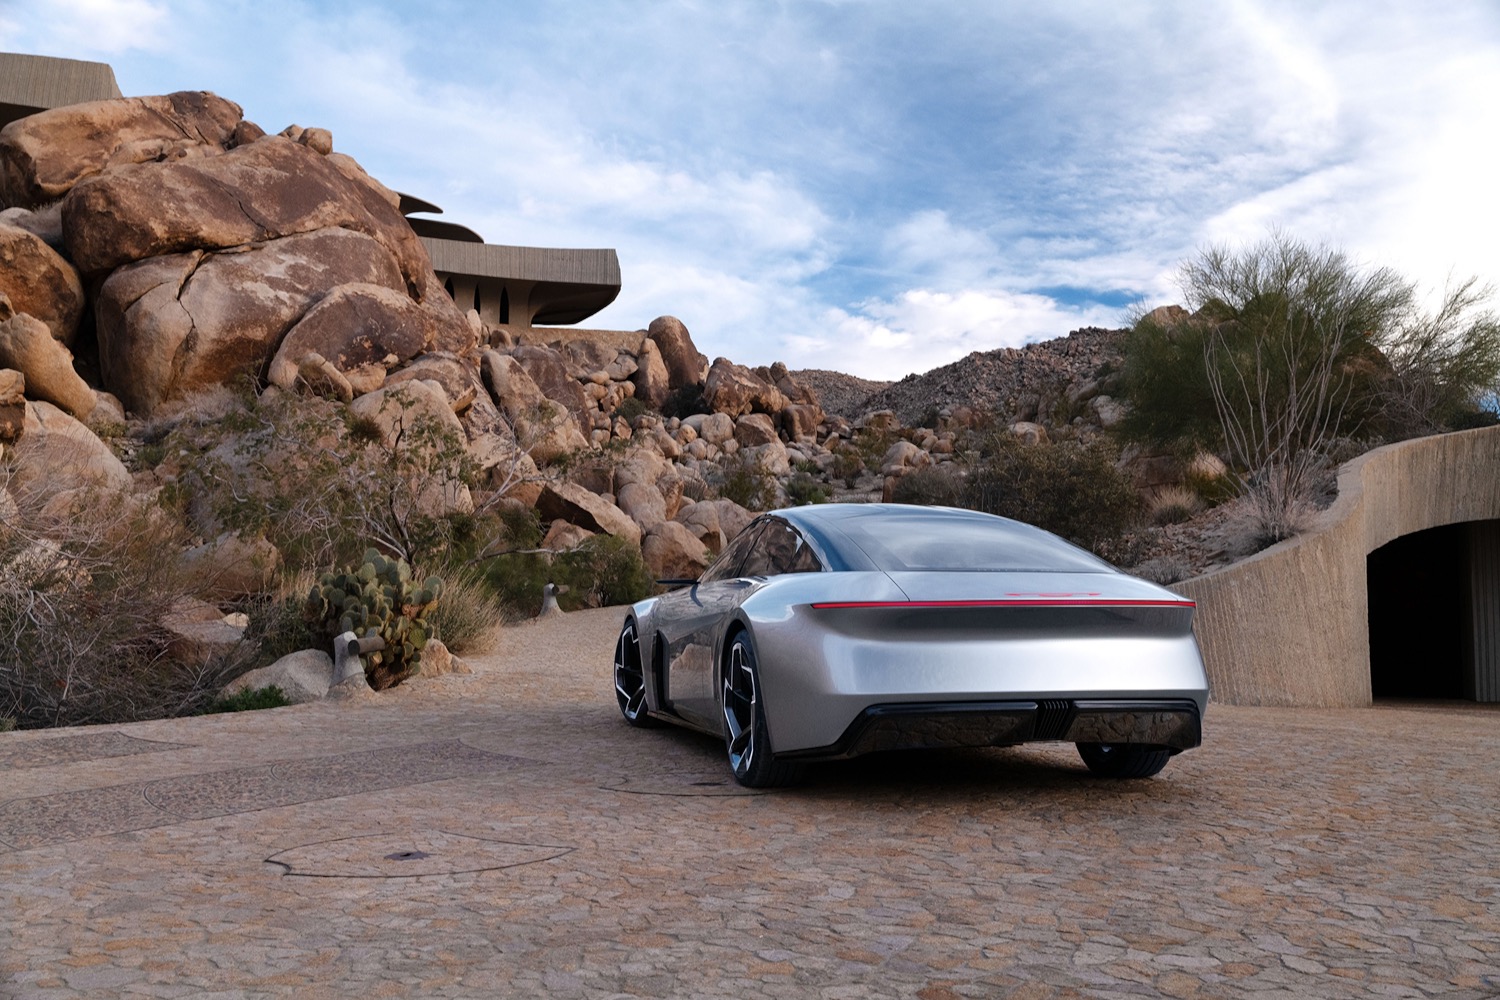 Chrysler Halcyon concept is another EV preview | Digital Trends